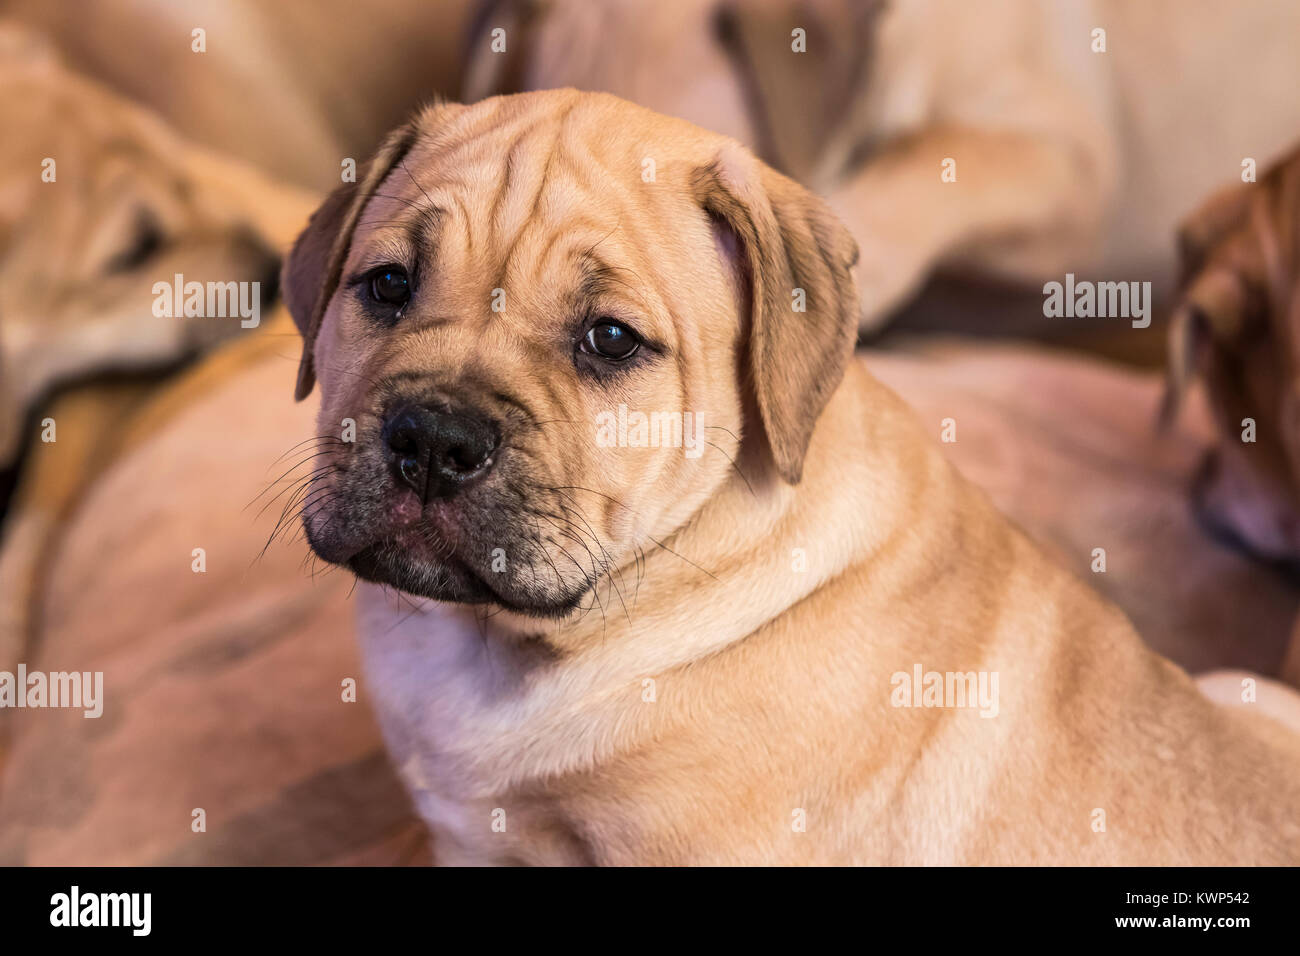 Brown 8 weeks old Ca de Bou (Mallorquin Mastiff) puppy dog with sleepy eyes looks on the camera Stock Photo